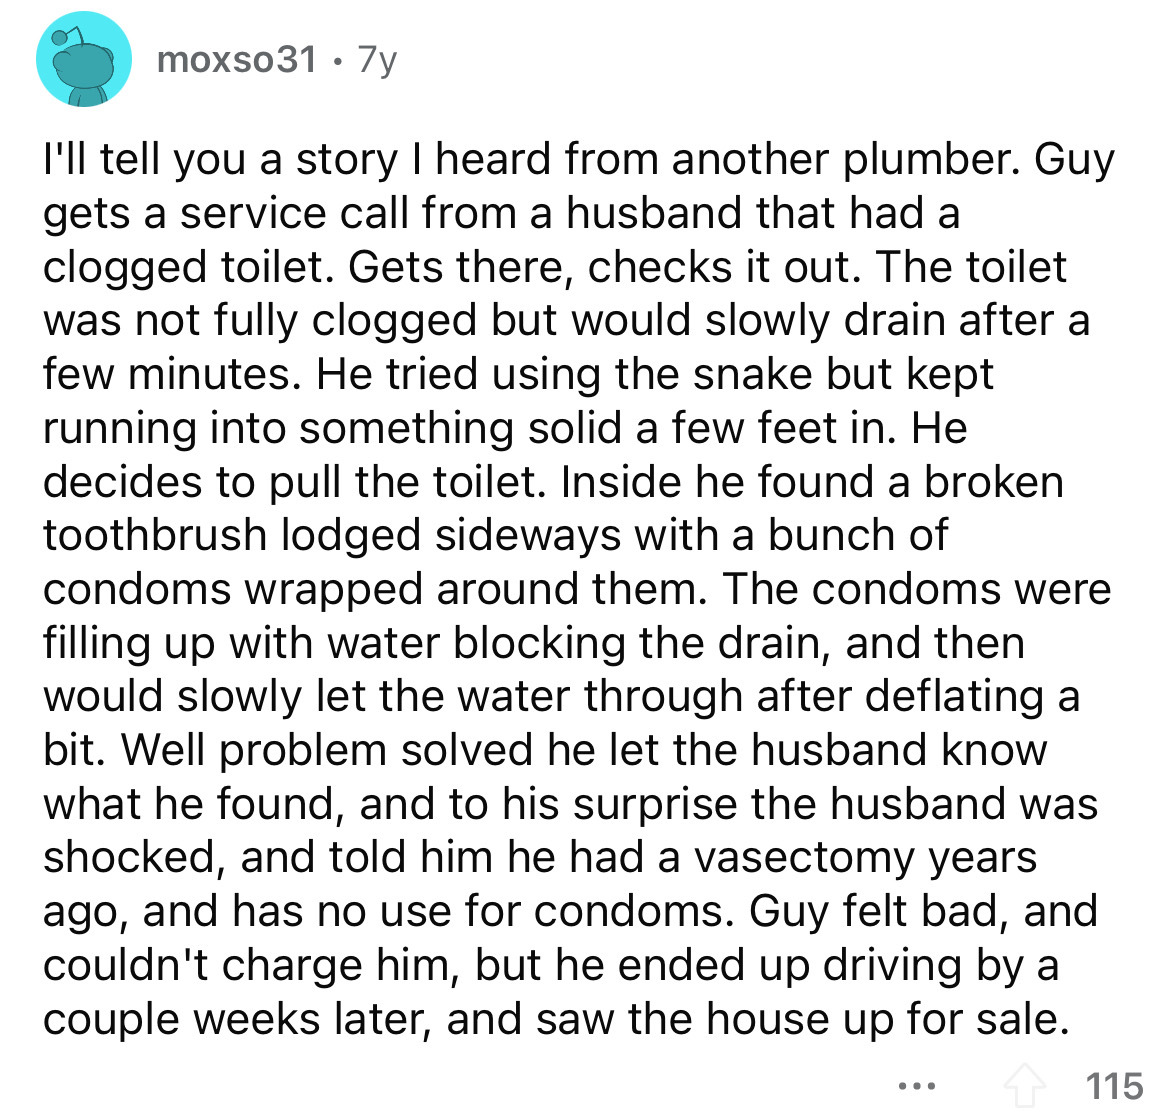 angle - moxso31. 7y I'll tell you a story I heard from another plumber. Guy gets a service call from a husband that had a clogged toilet. Gets there, checks it out. The toilet was not fully clogged but would slowly drain after a few minutes. He tried usin